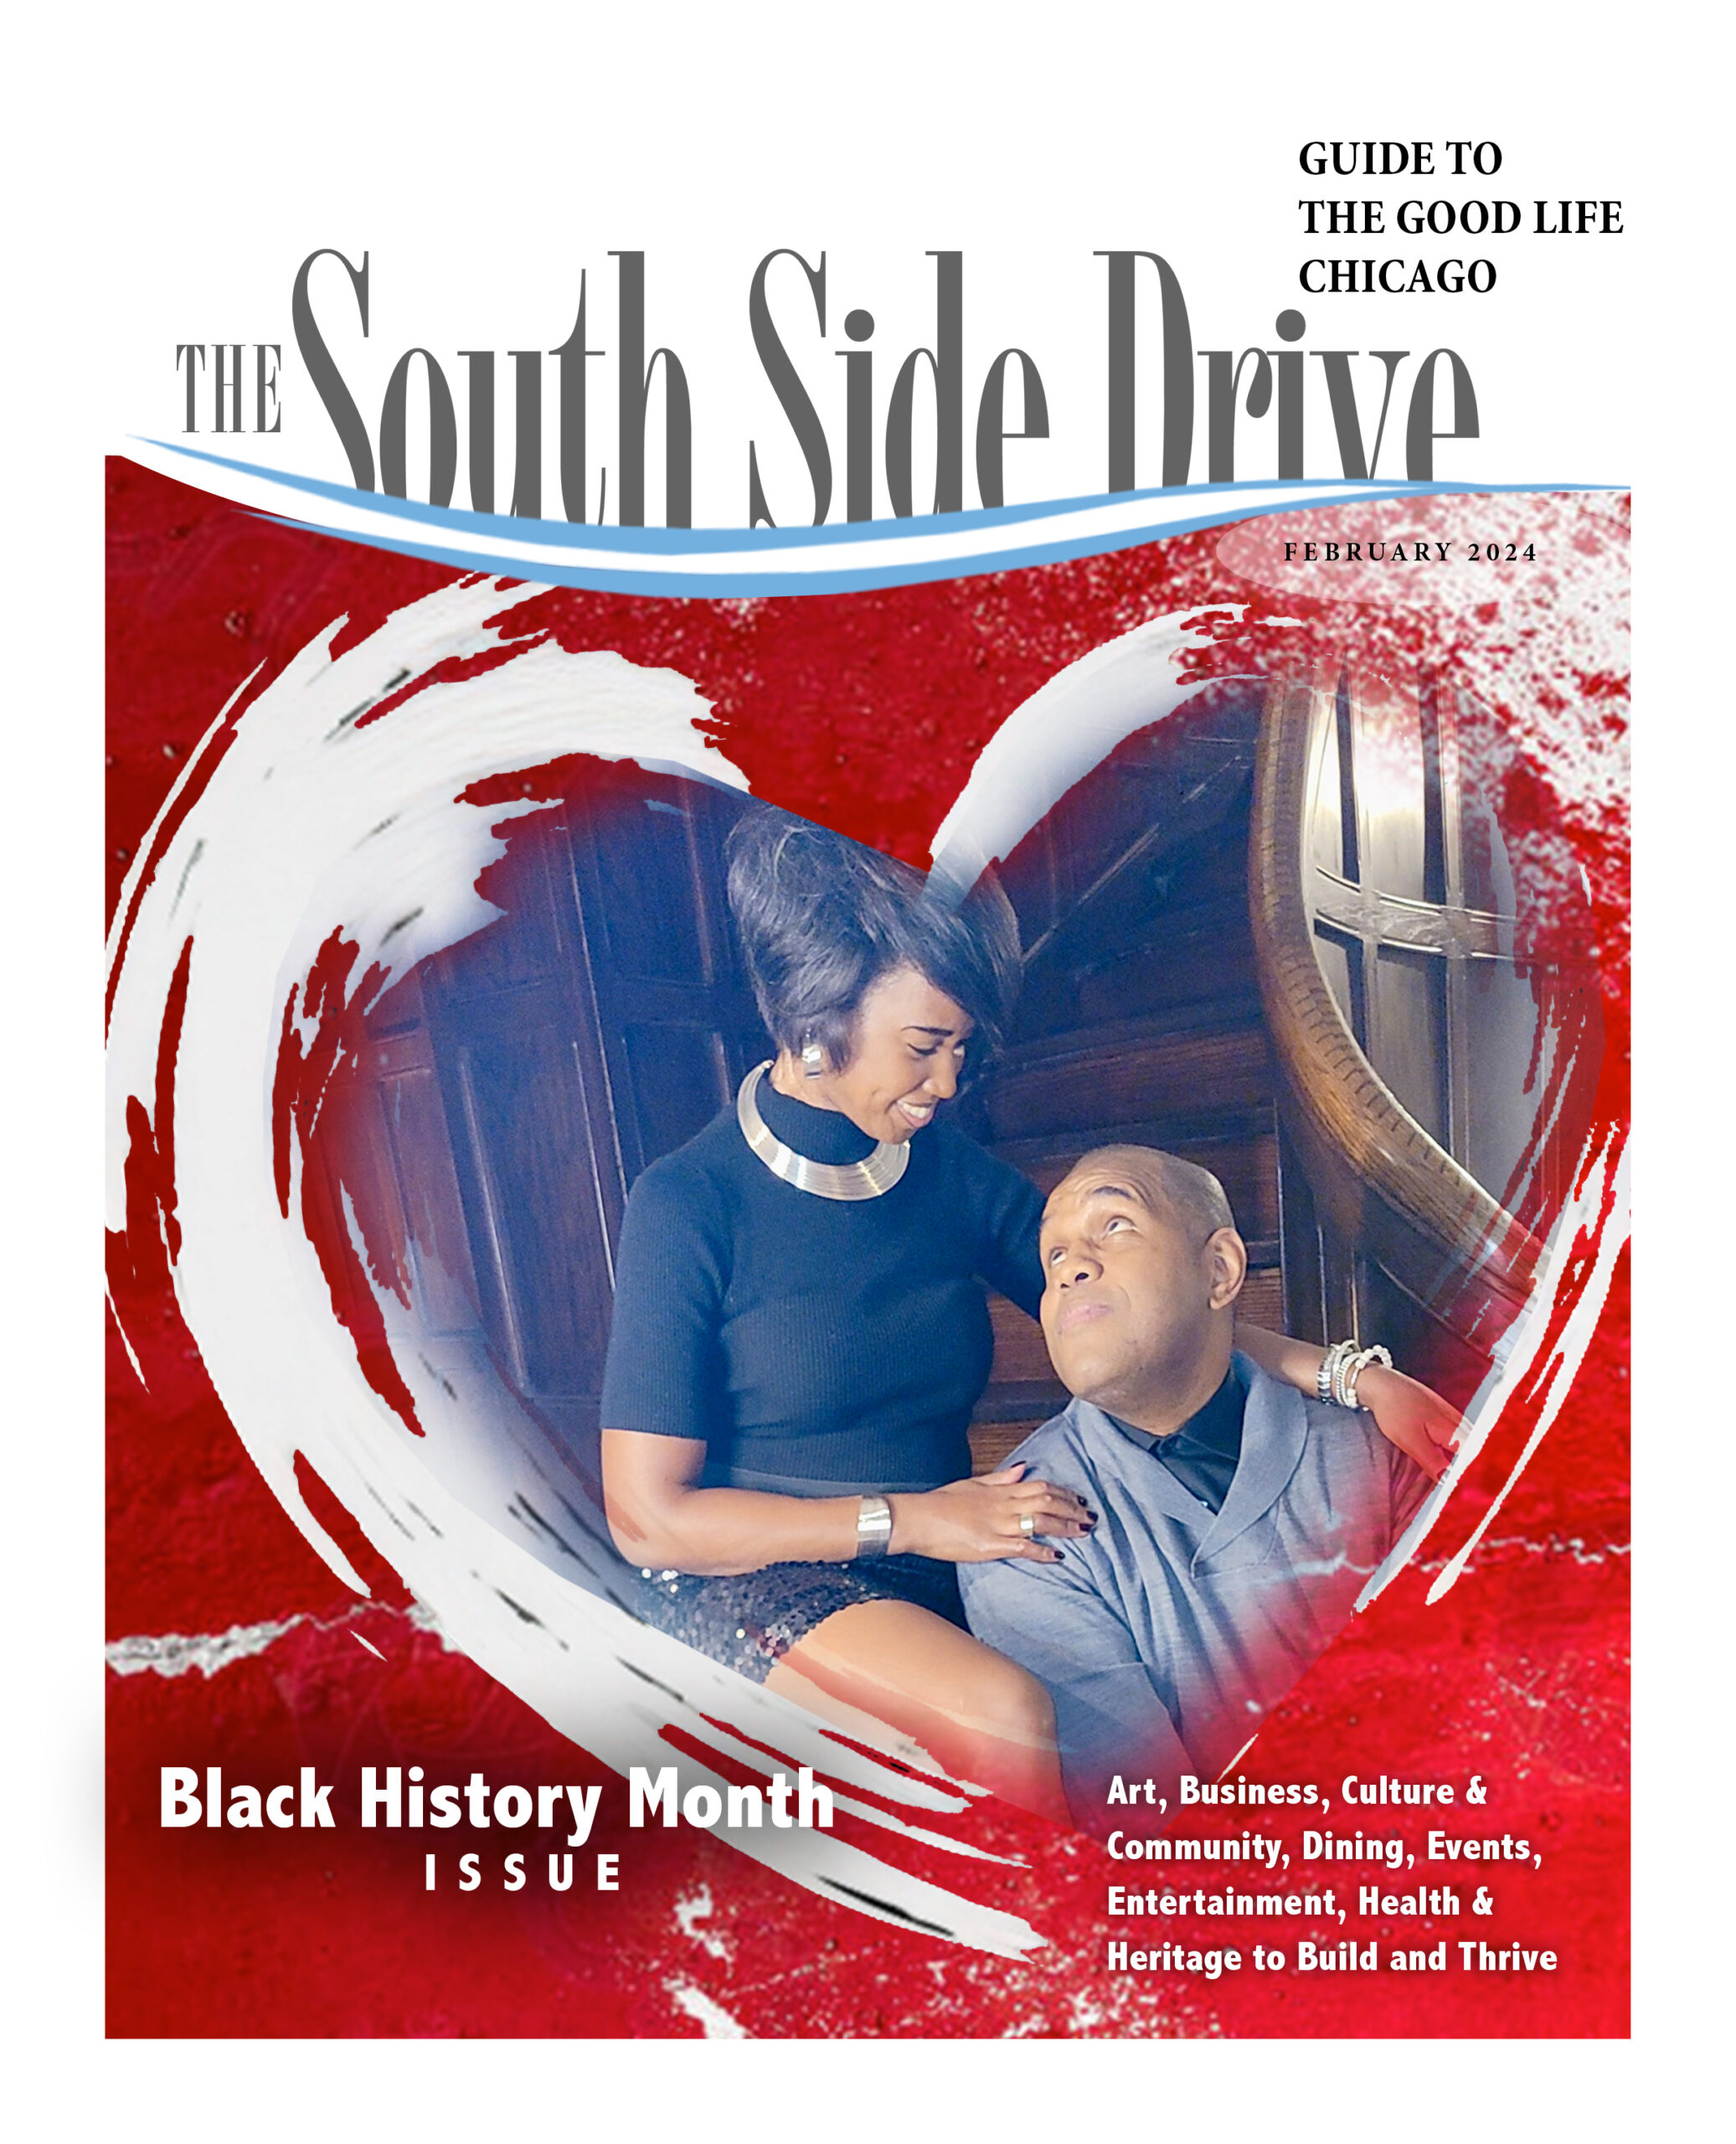 South Side Drive Magazine – Guide to the Good Life Chicago